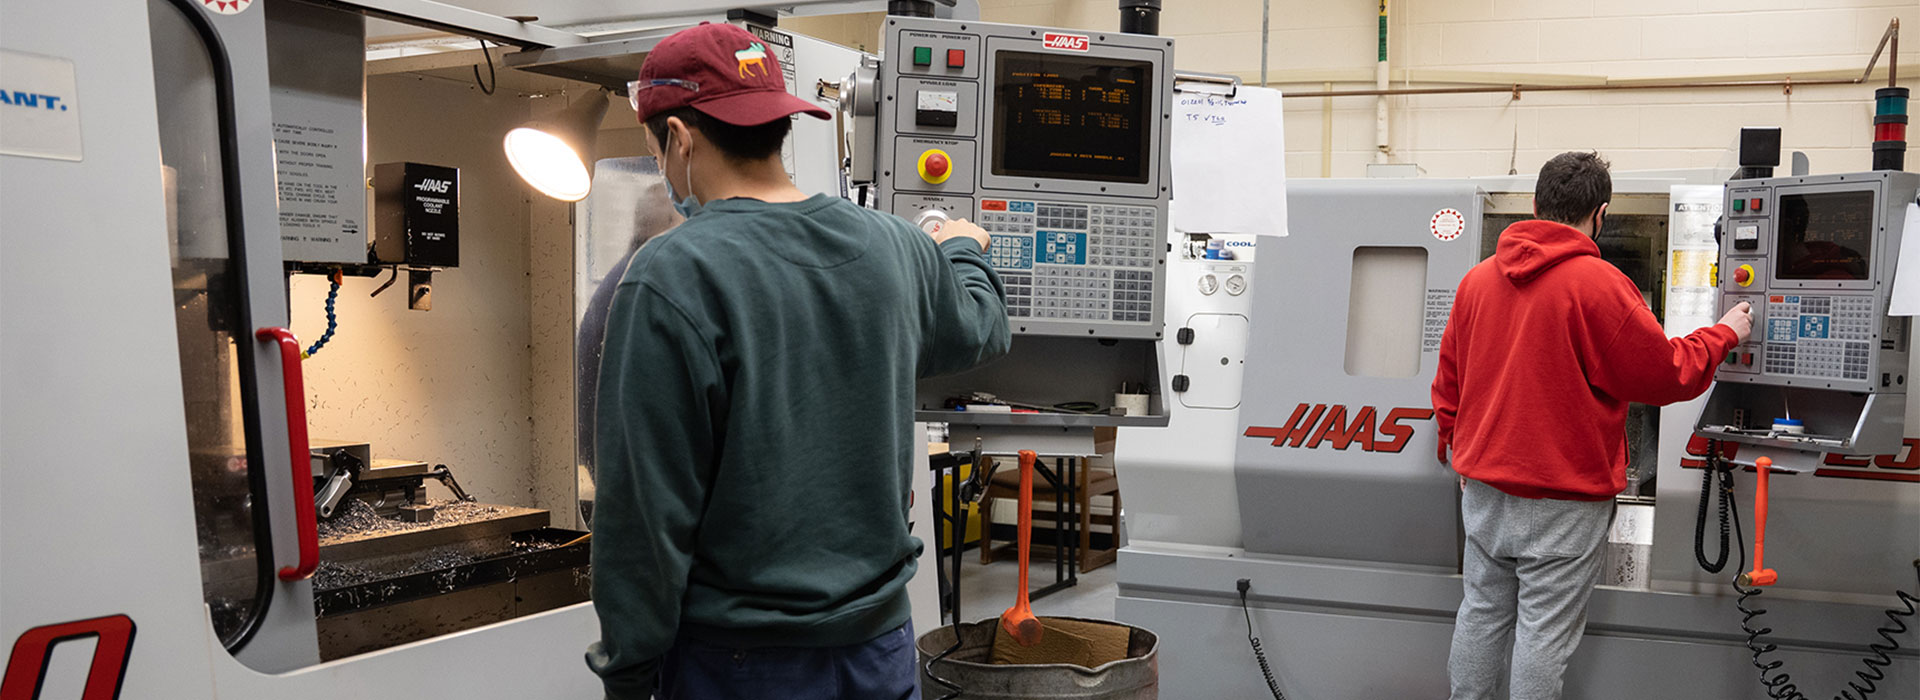 Two mechanical engineering students work with machining equipment in a lab.